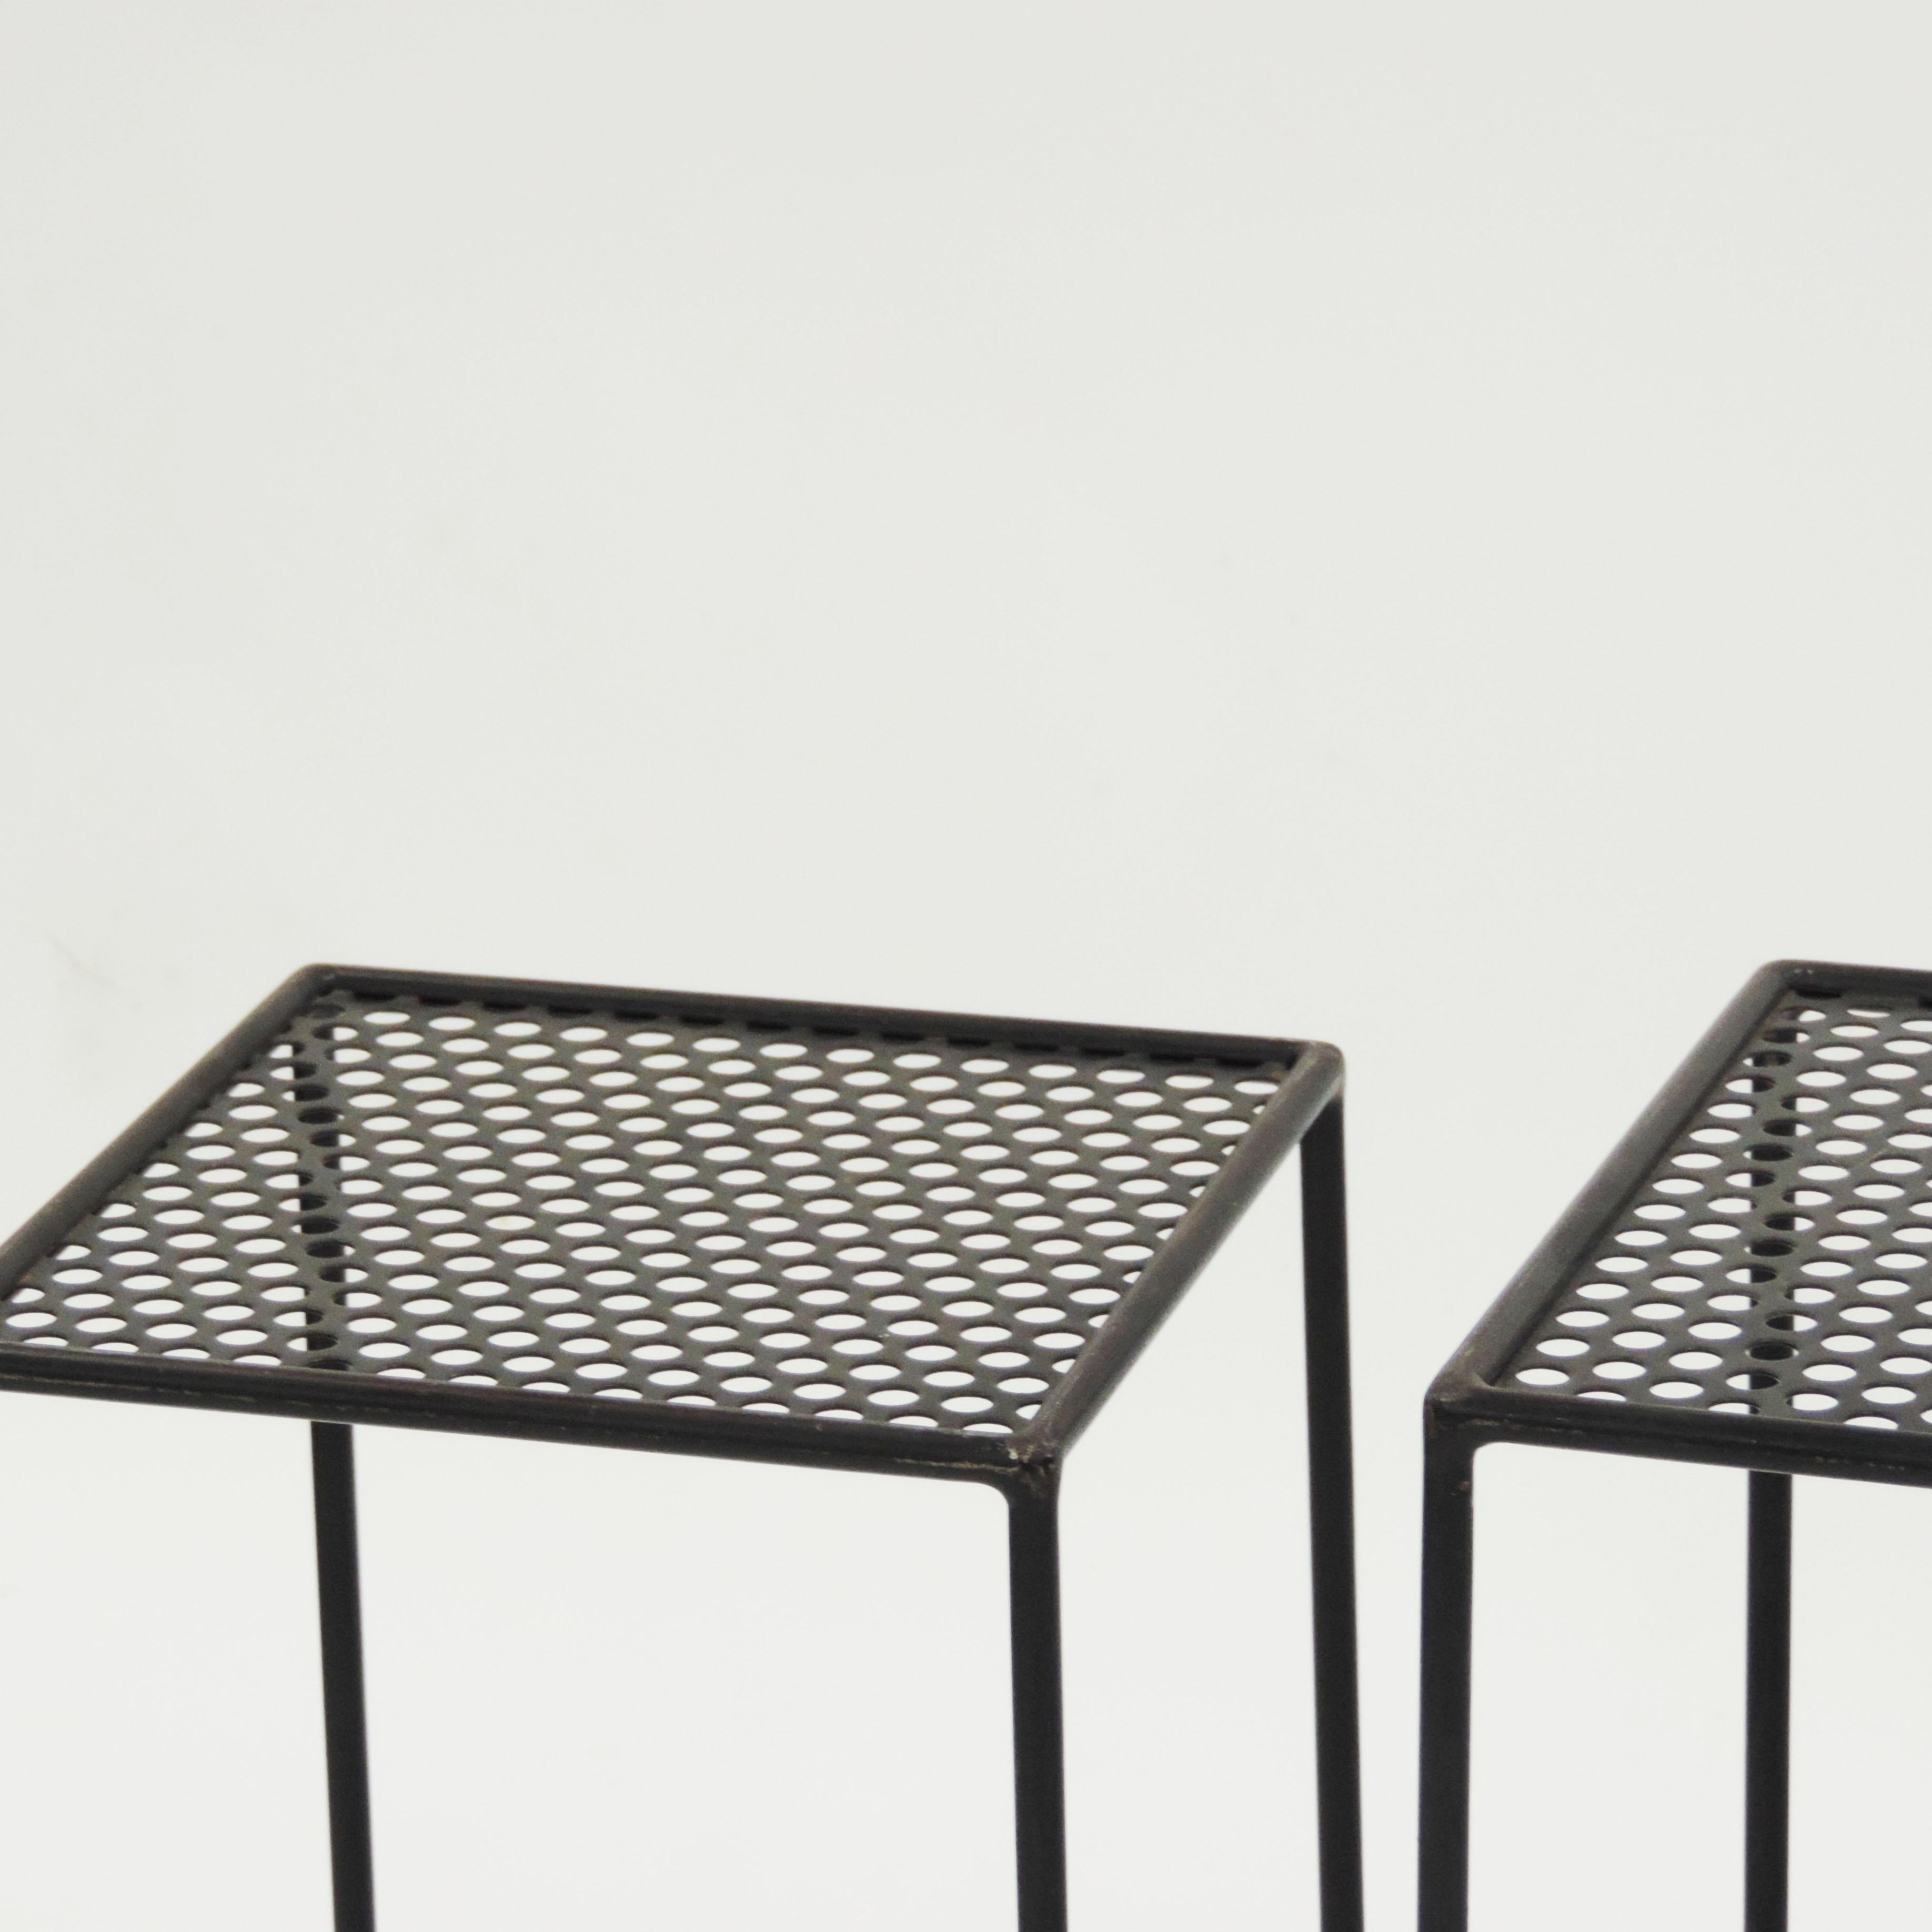 Giuseppe De Vivo nesting tables in perforated metal, Italy, 1950s.